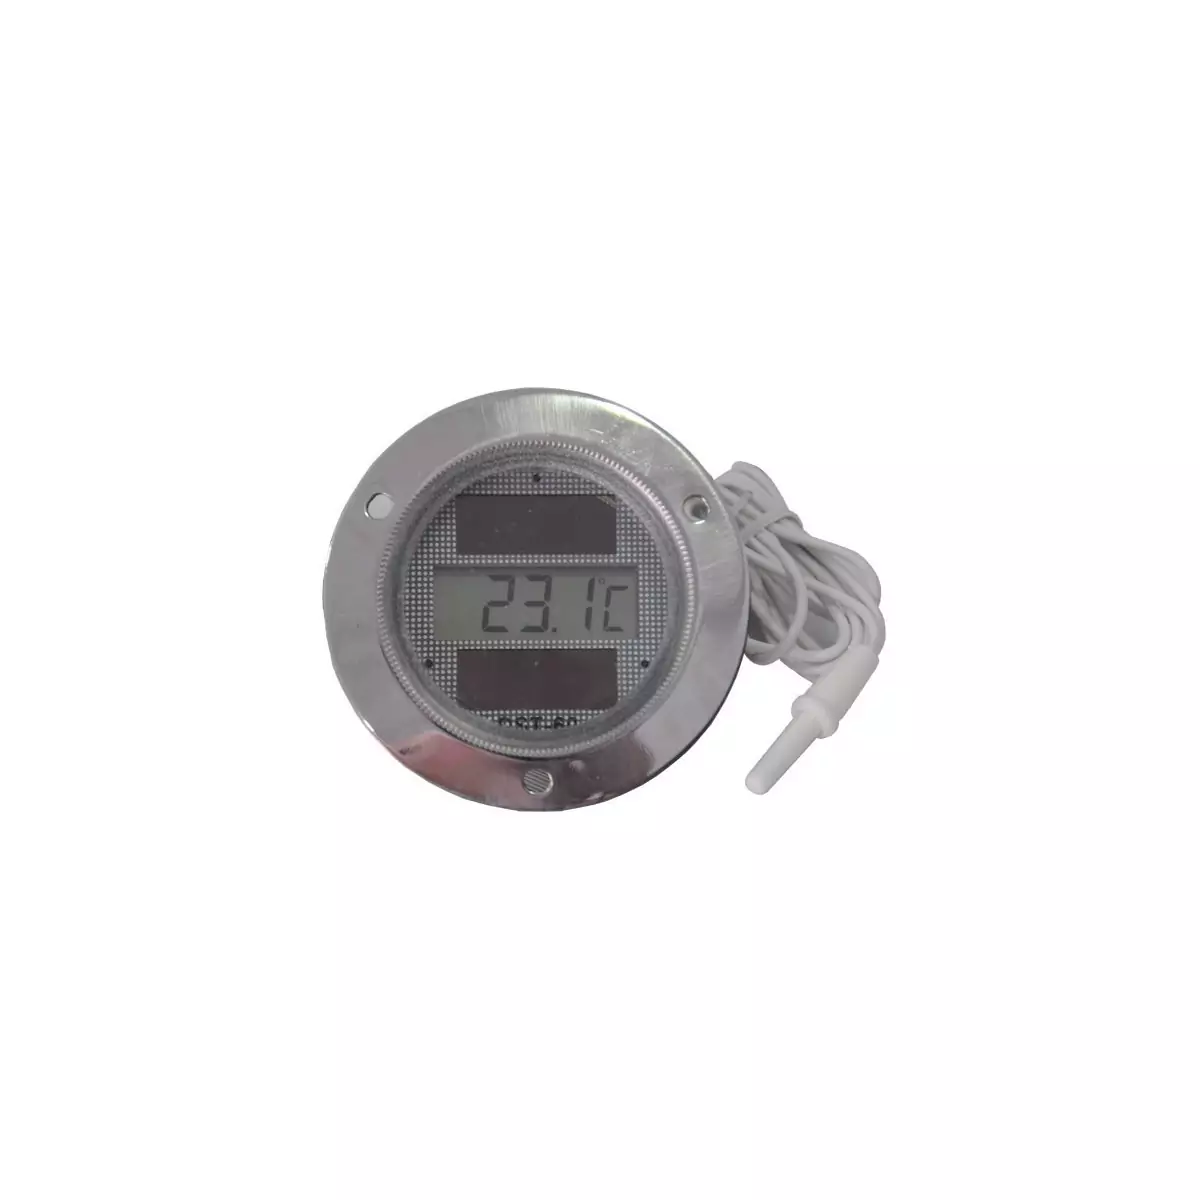 Thermometre DST 12 solaire